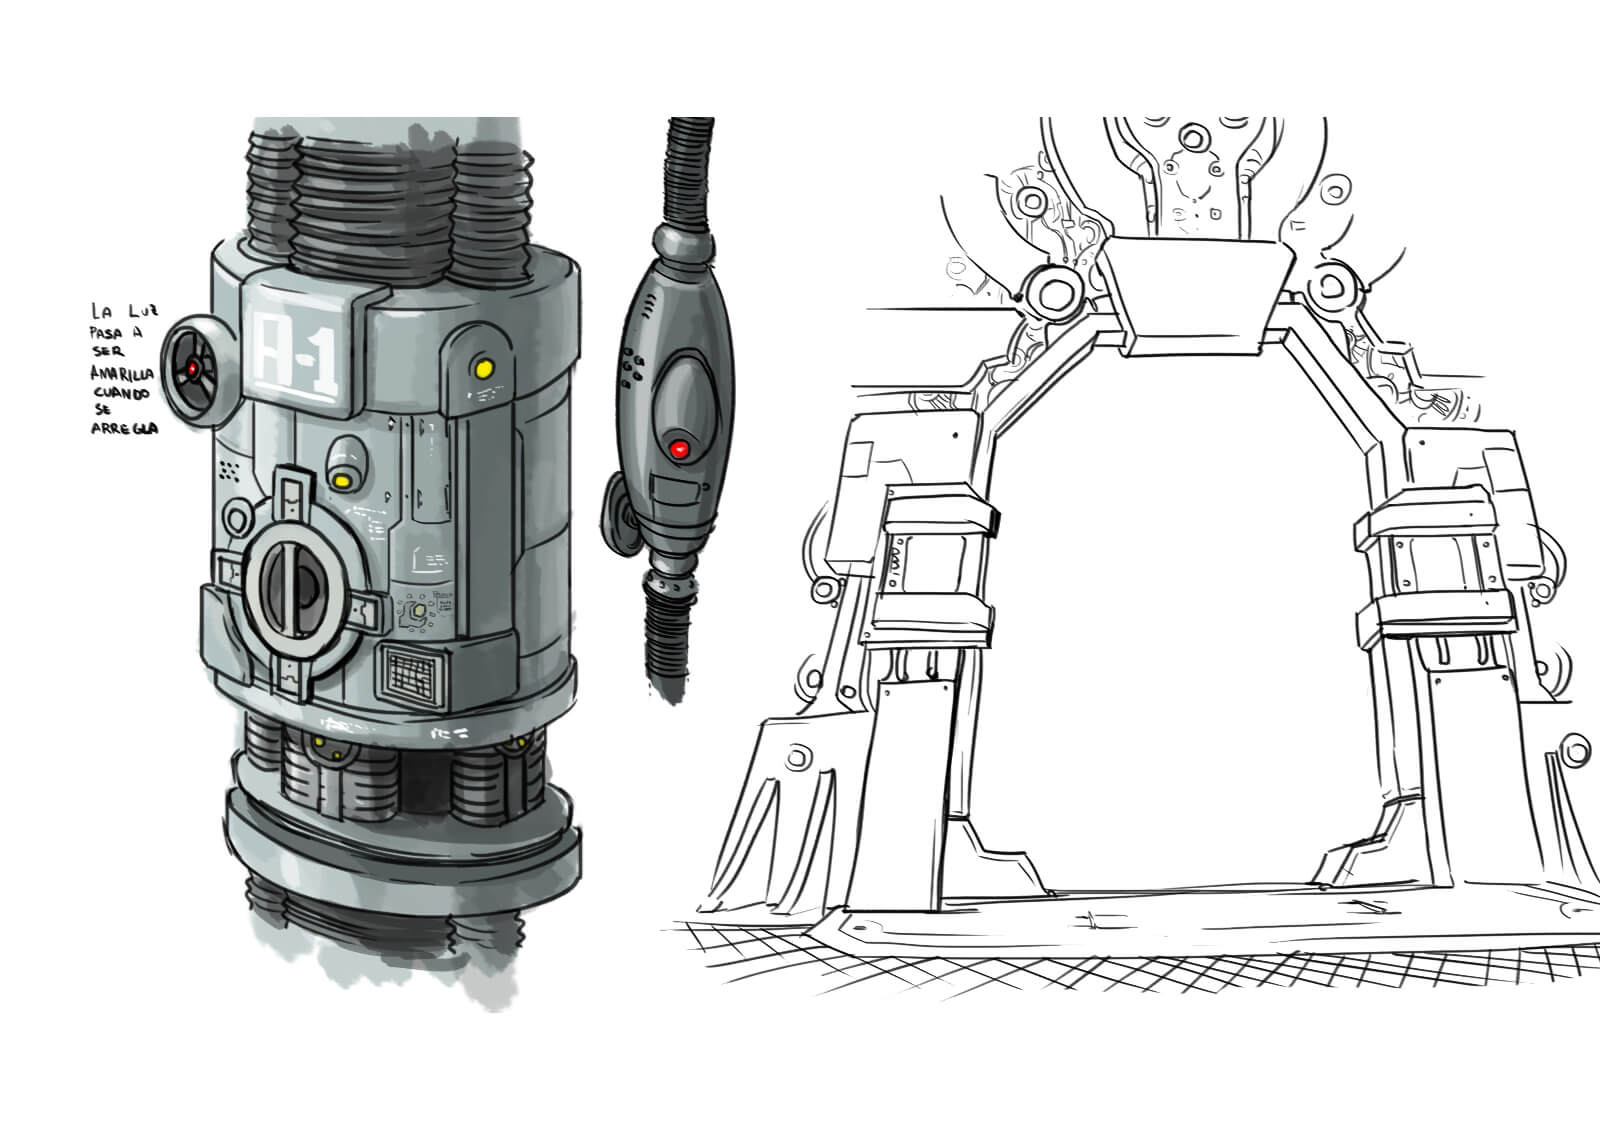 Color sketch of a gray, metallic chamber and a black-and-white sketch of a futuristic doorway